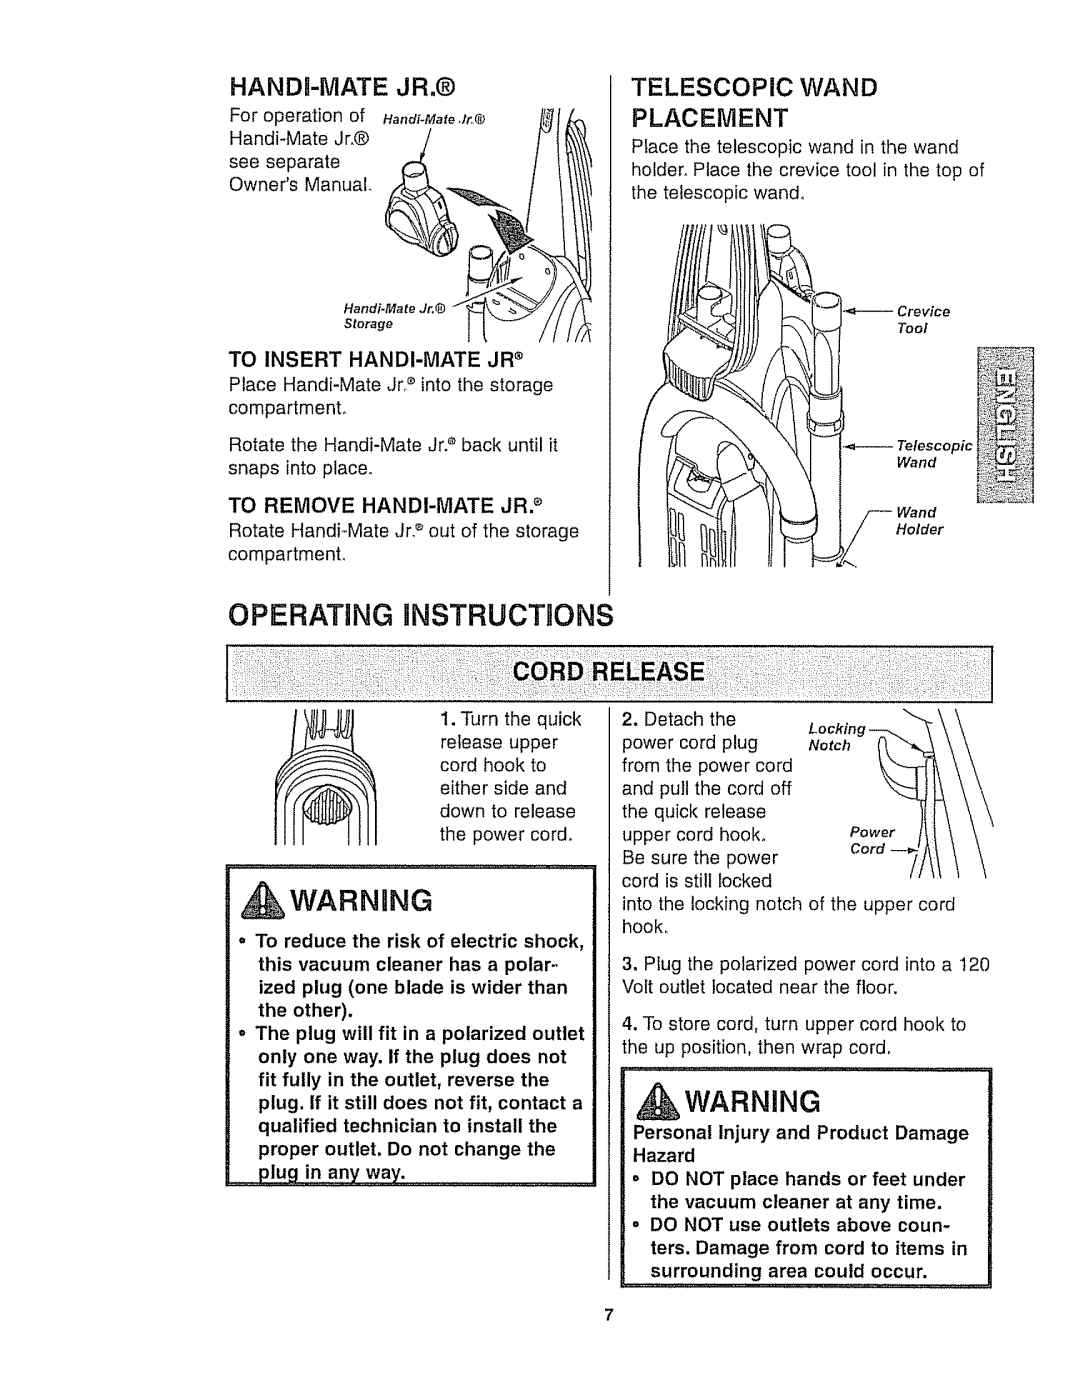 Kenmore 116.35923 Operating Instructions, Placement, Handr-Mate, Telescopic Wand, =DO NOT place hands or feet under 